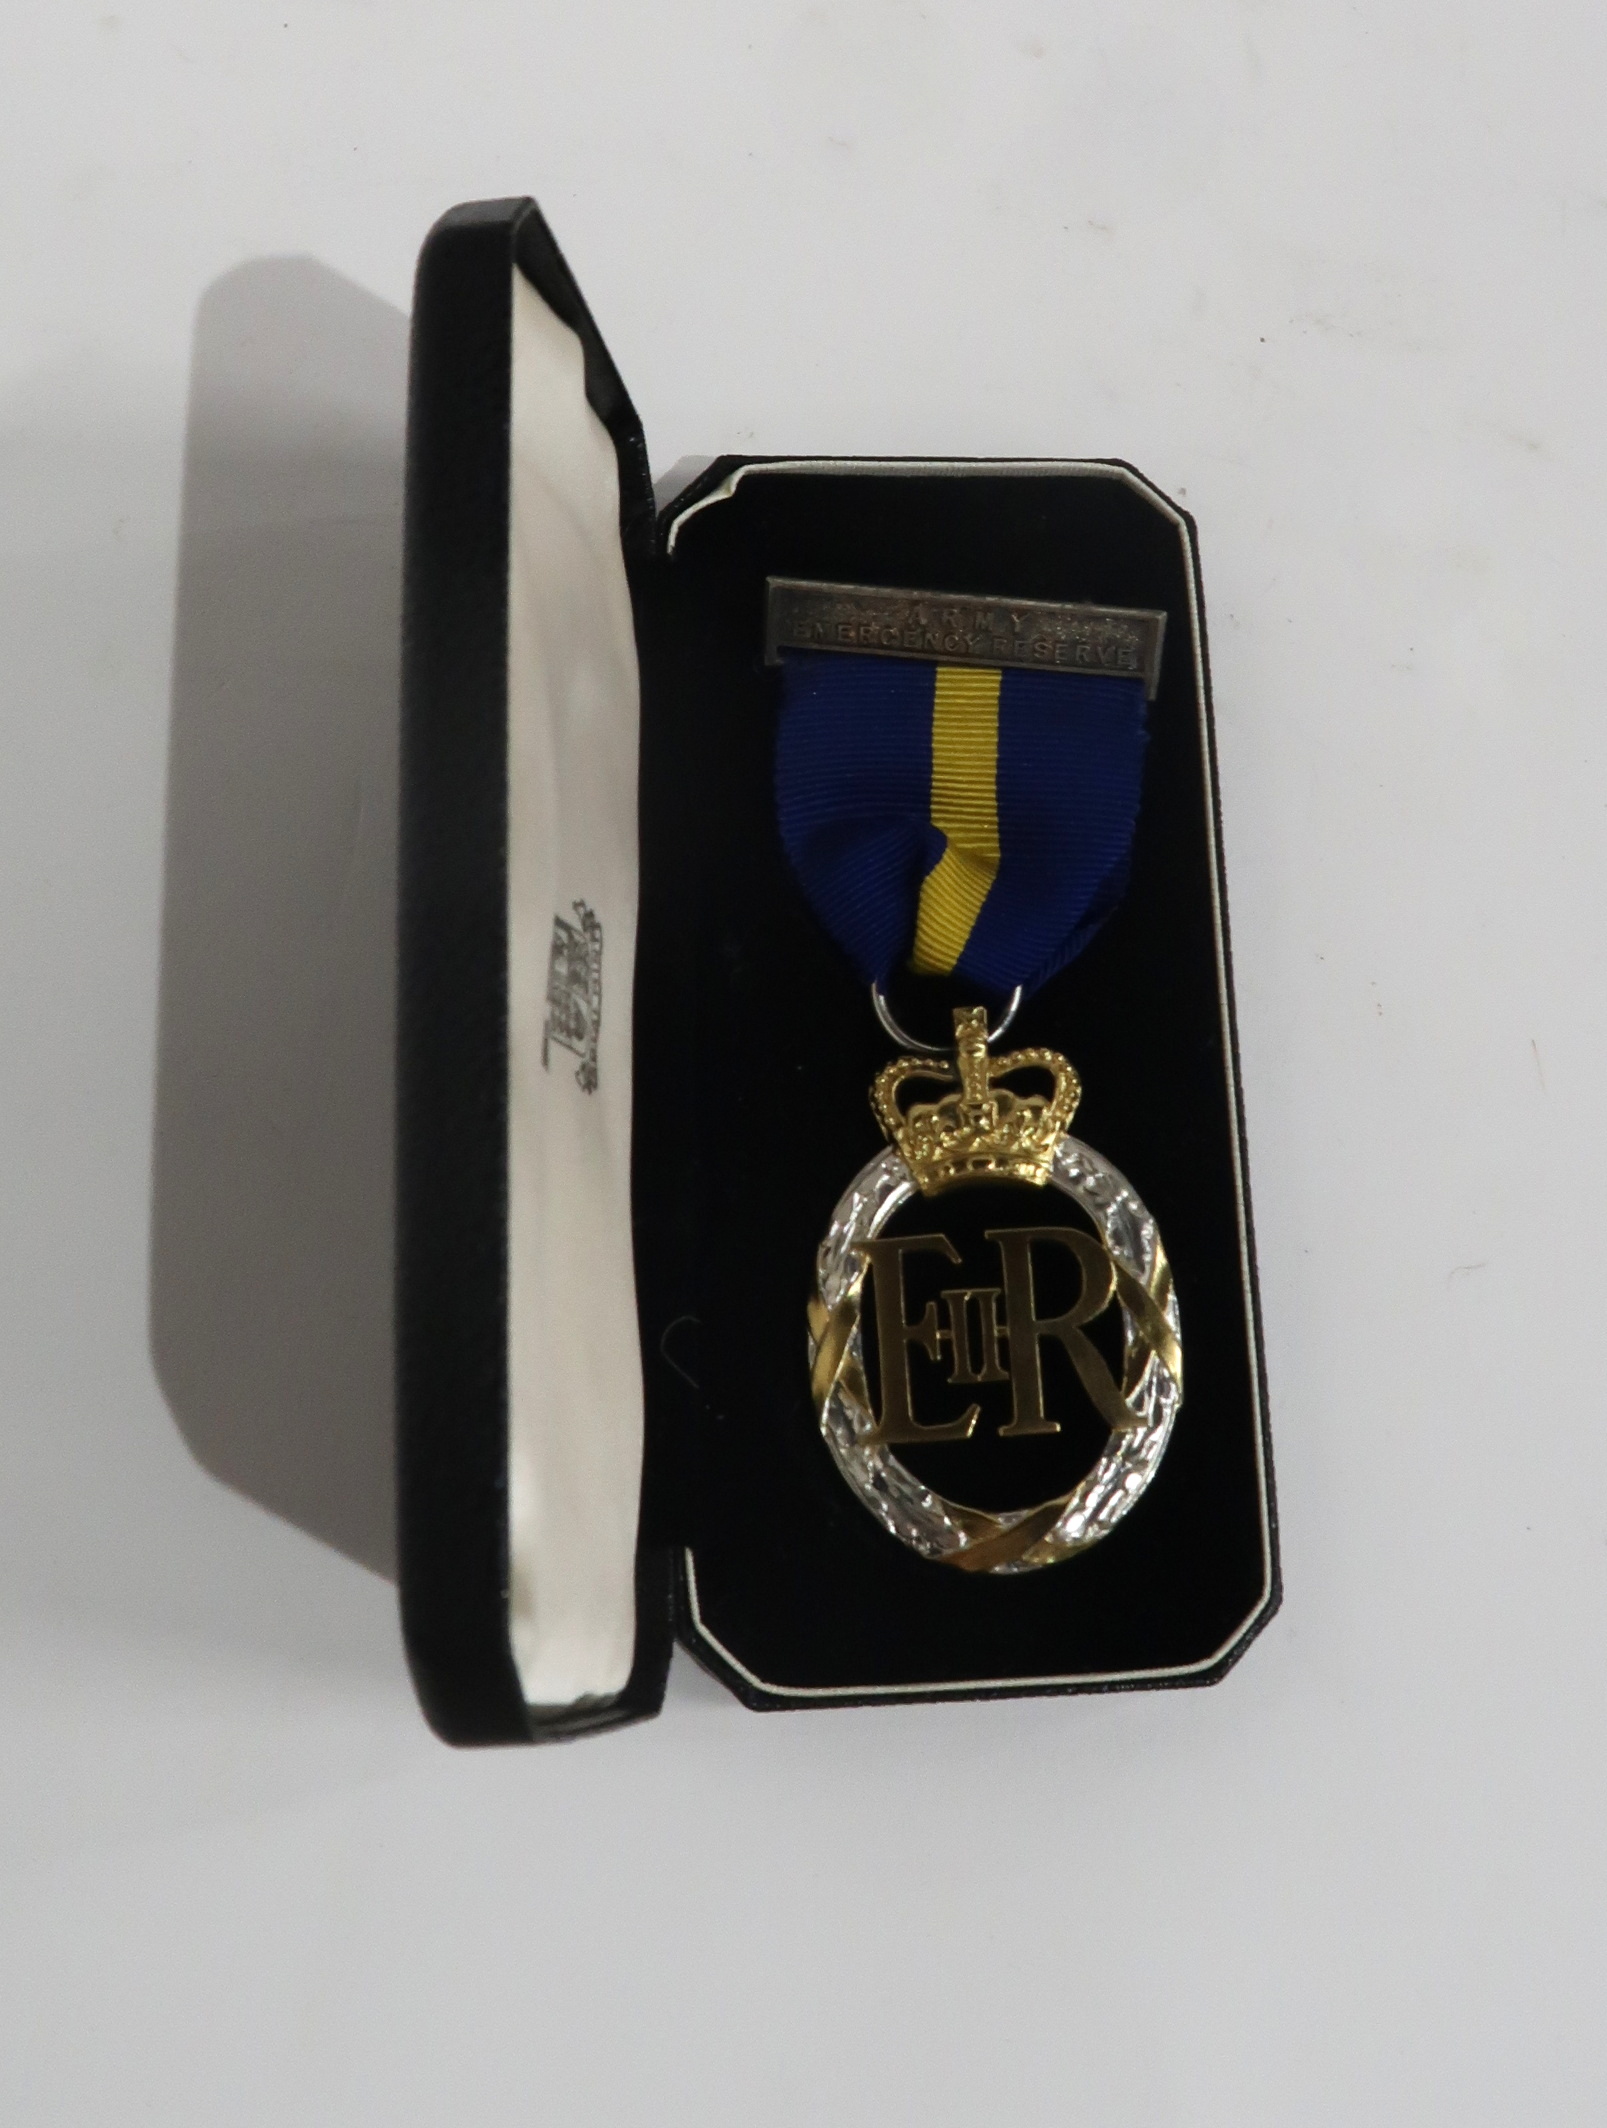 *WITHDRAWN* A CASED QUEEN ELIZABETH ARMY EMERGENCY RESERVE MEDAL 1963 in box of issue - Image 2 of 4